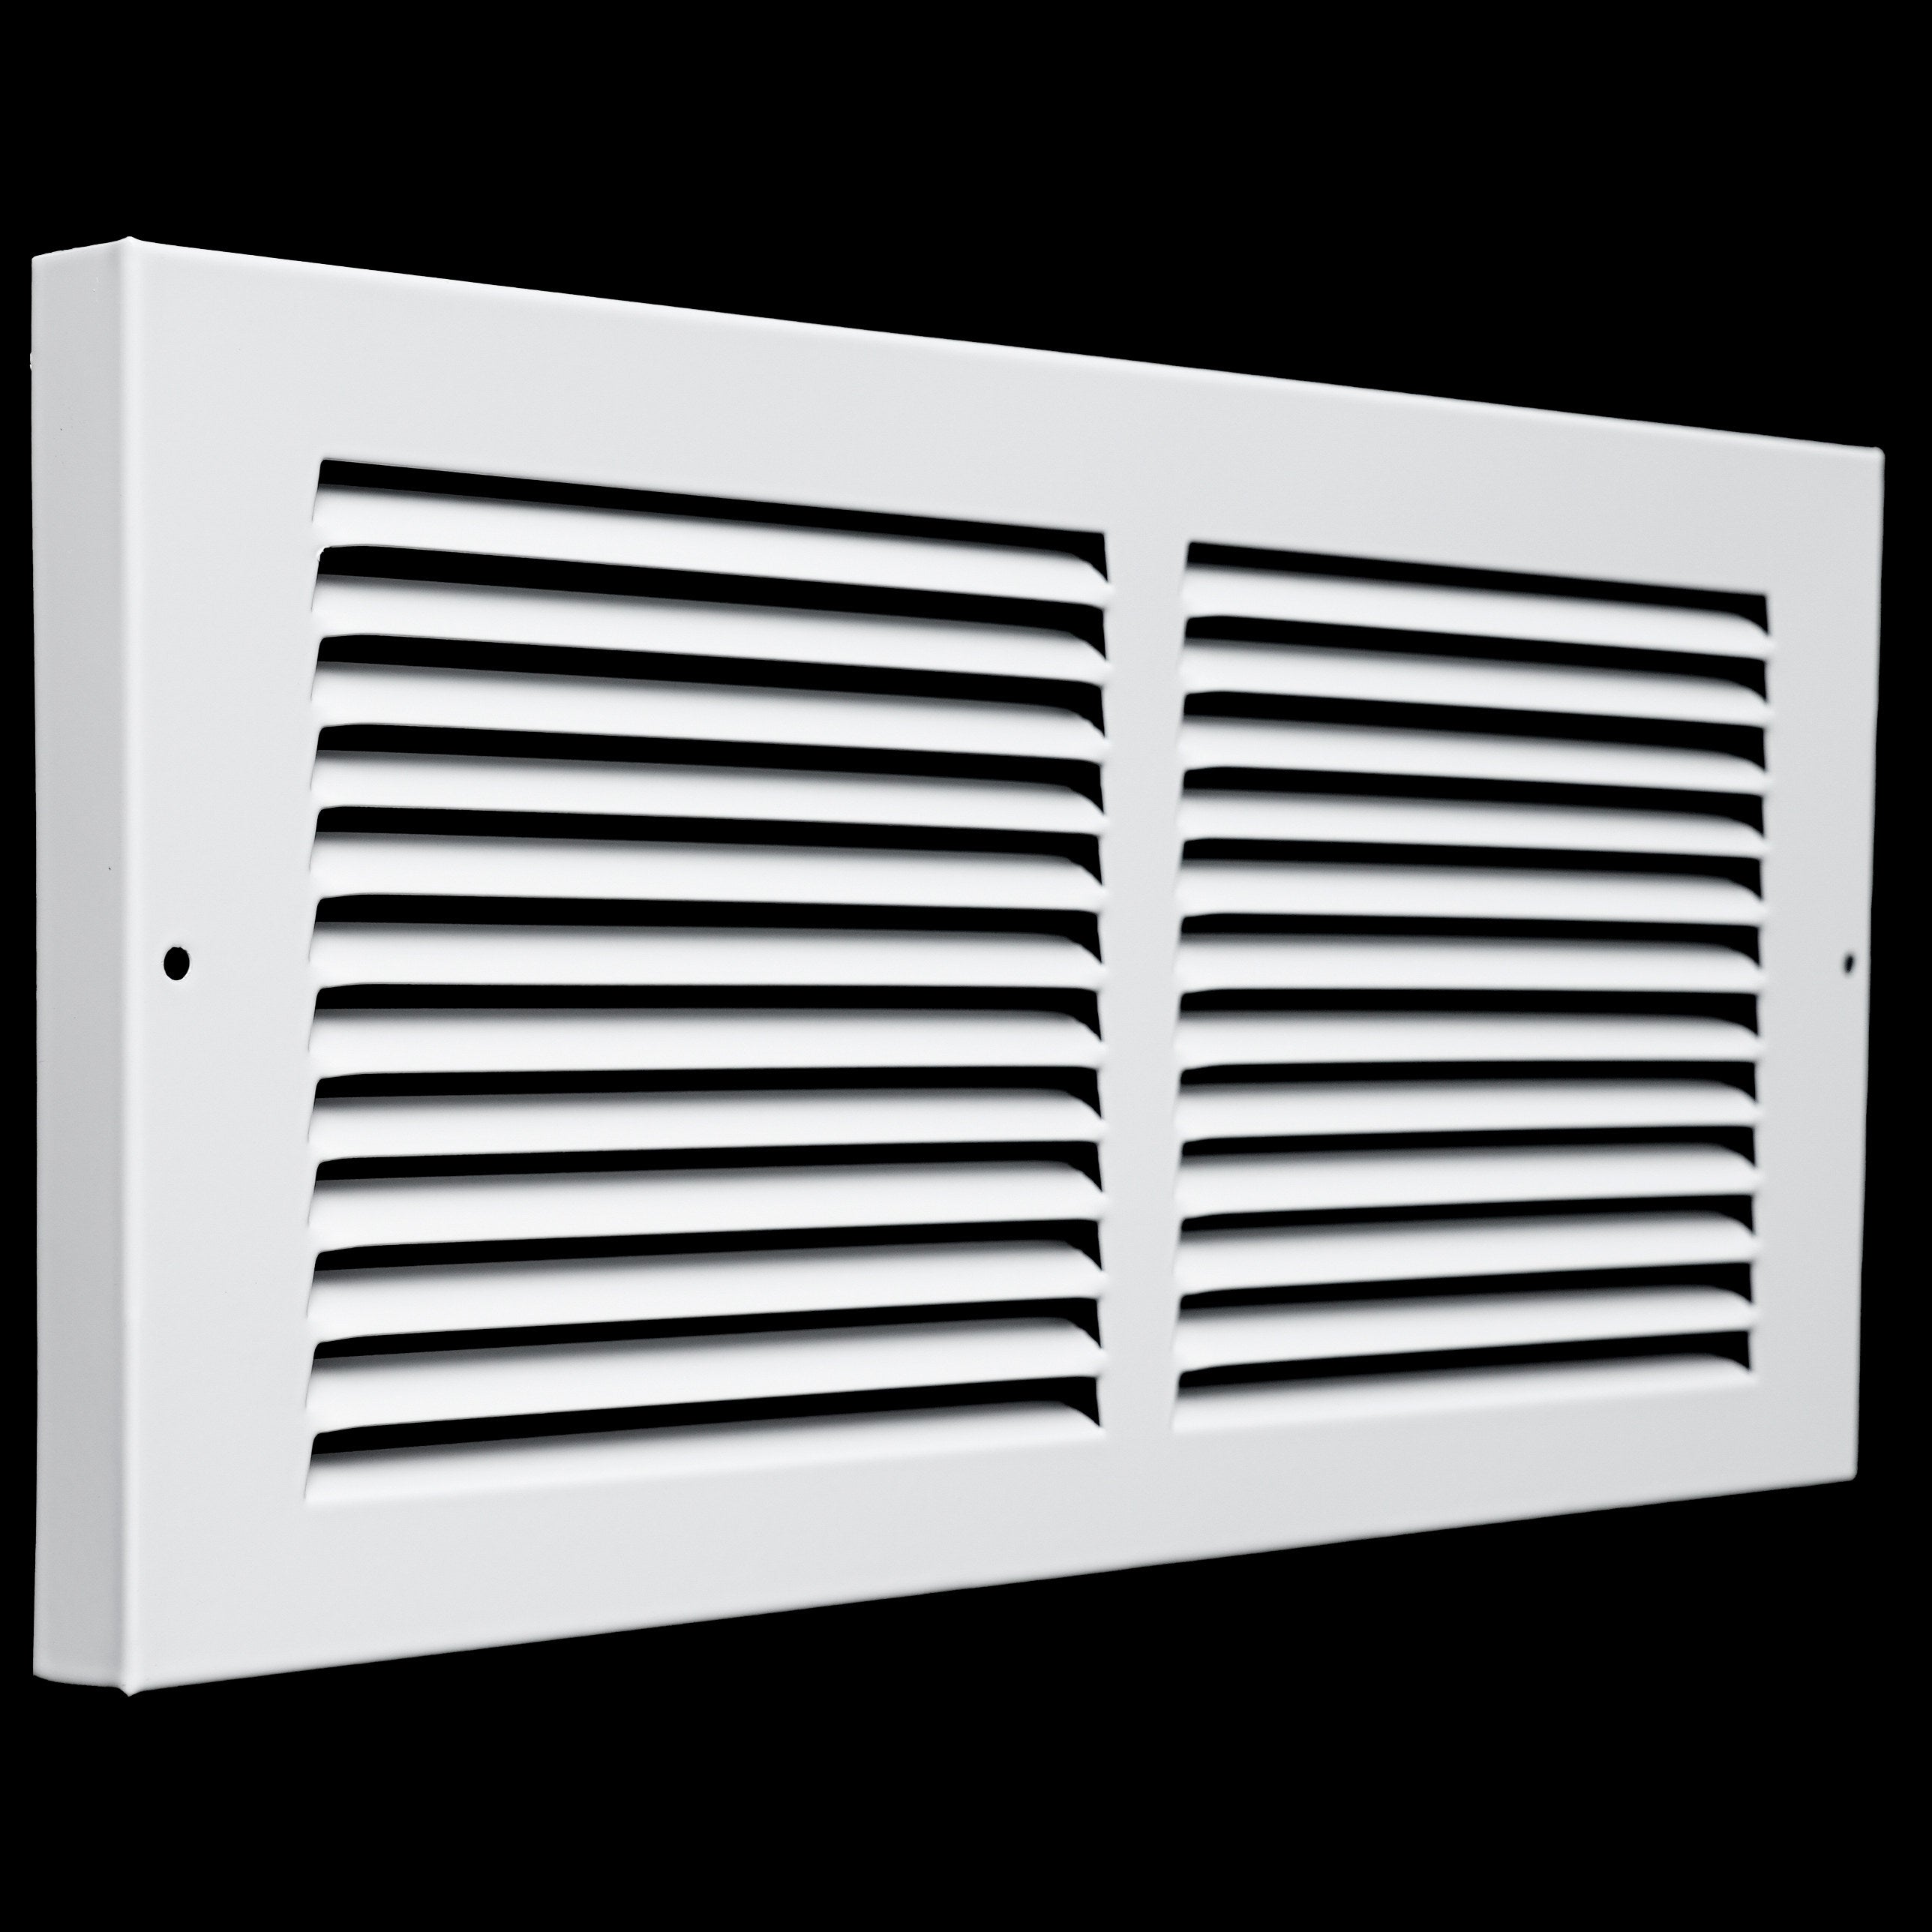 airgrilles 14"w x 6"h baseboard return air grille  -  vent cover grill  -  7/8" margin turnback to fit baseboard  -  white  -  outer dimensions: 15.75"w x 7.75"h for 14x6 duct opening hnd-bra-wh-14x6  - 1